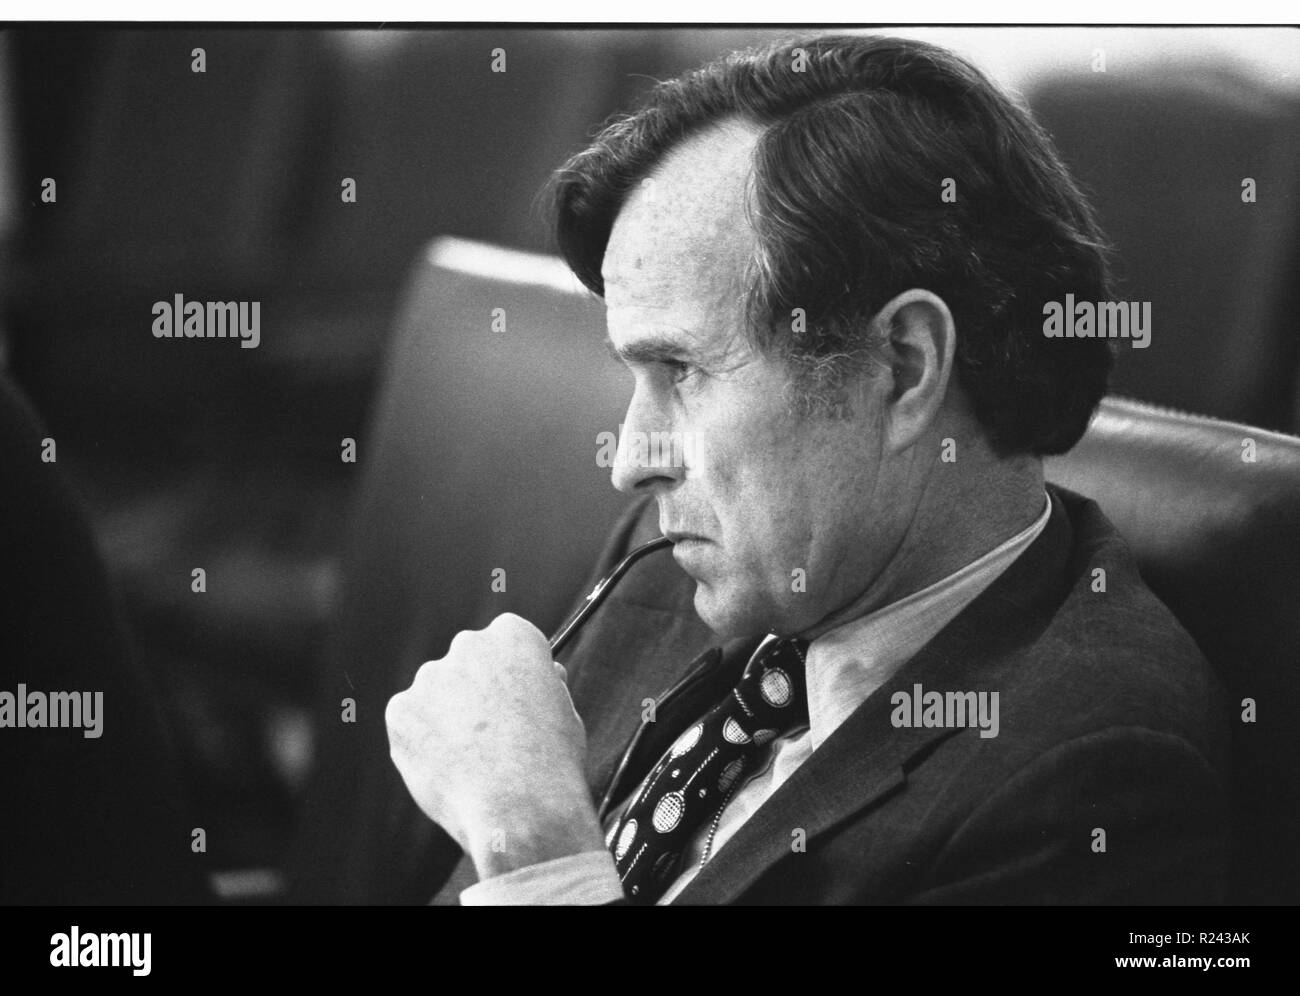 George Herbert Walker Bush (born June 12, 1924) 41st President of the United States (1989-1993). A Republican, he had previously served as Vice President (1981-1989), congressman, ambassador, and Director of Central Intelligence 1976-77 Stock Photo